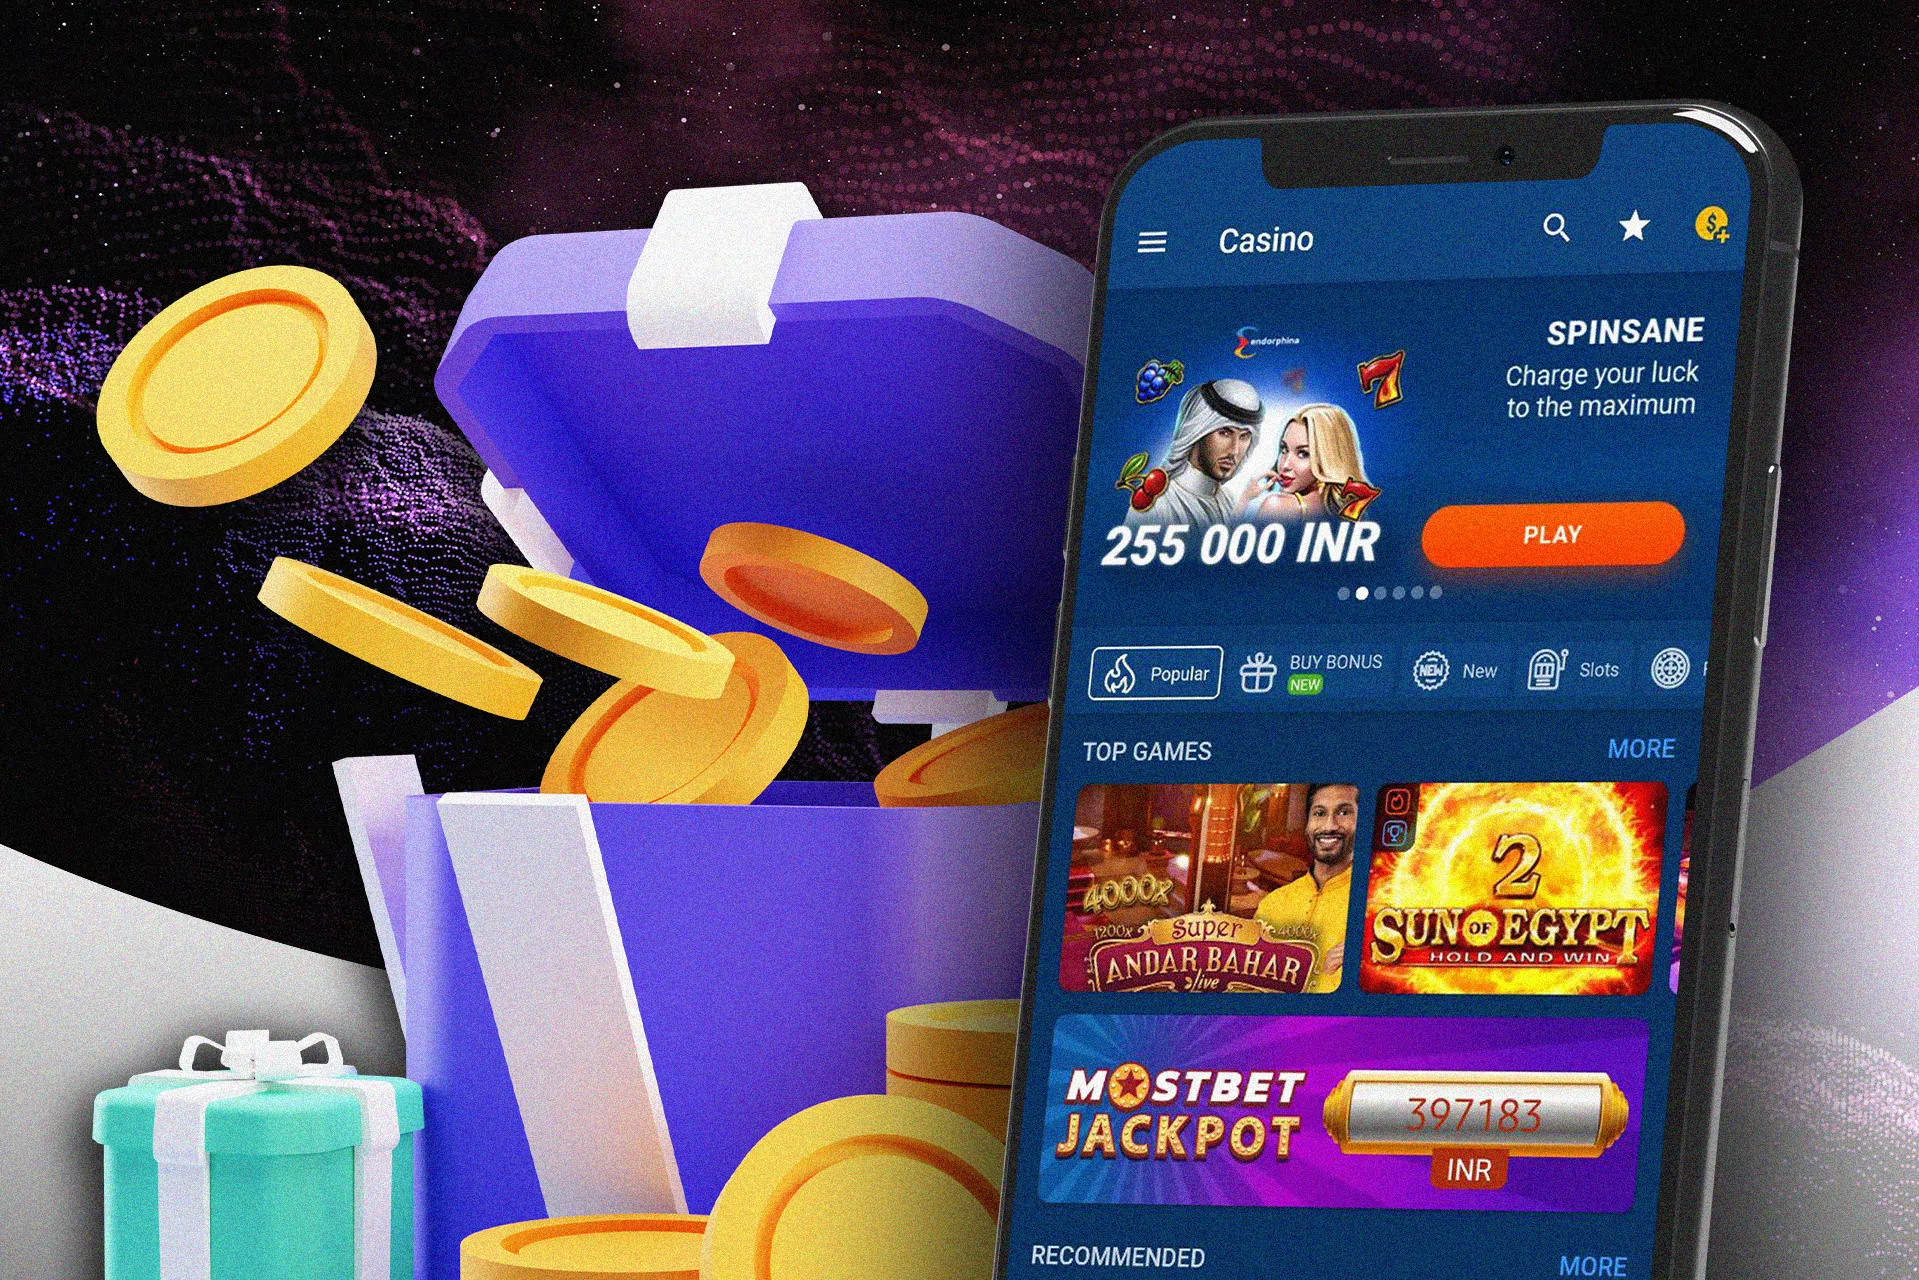 Get free spins on the Mostbet online casino games.